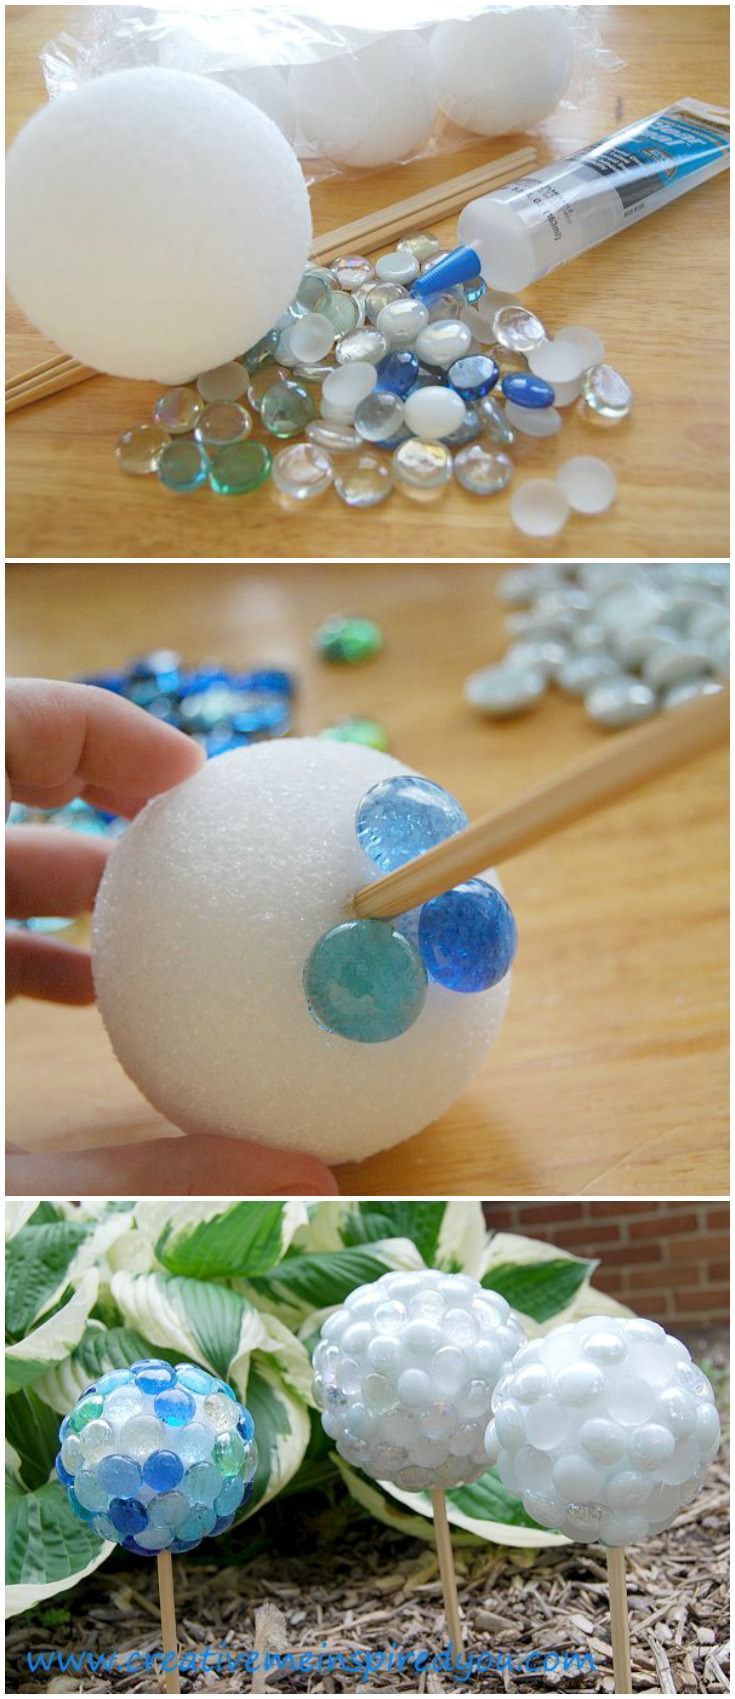 Create beautiful garden gazing stones from dollar store finds. Use glass marbles...